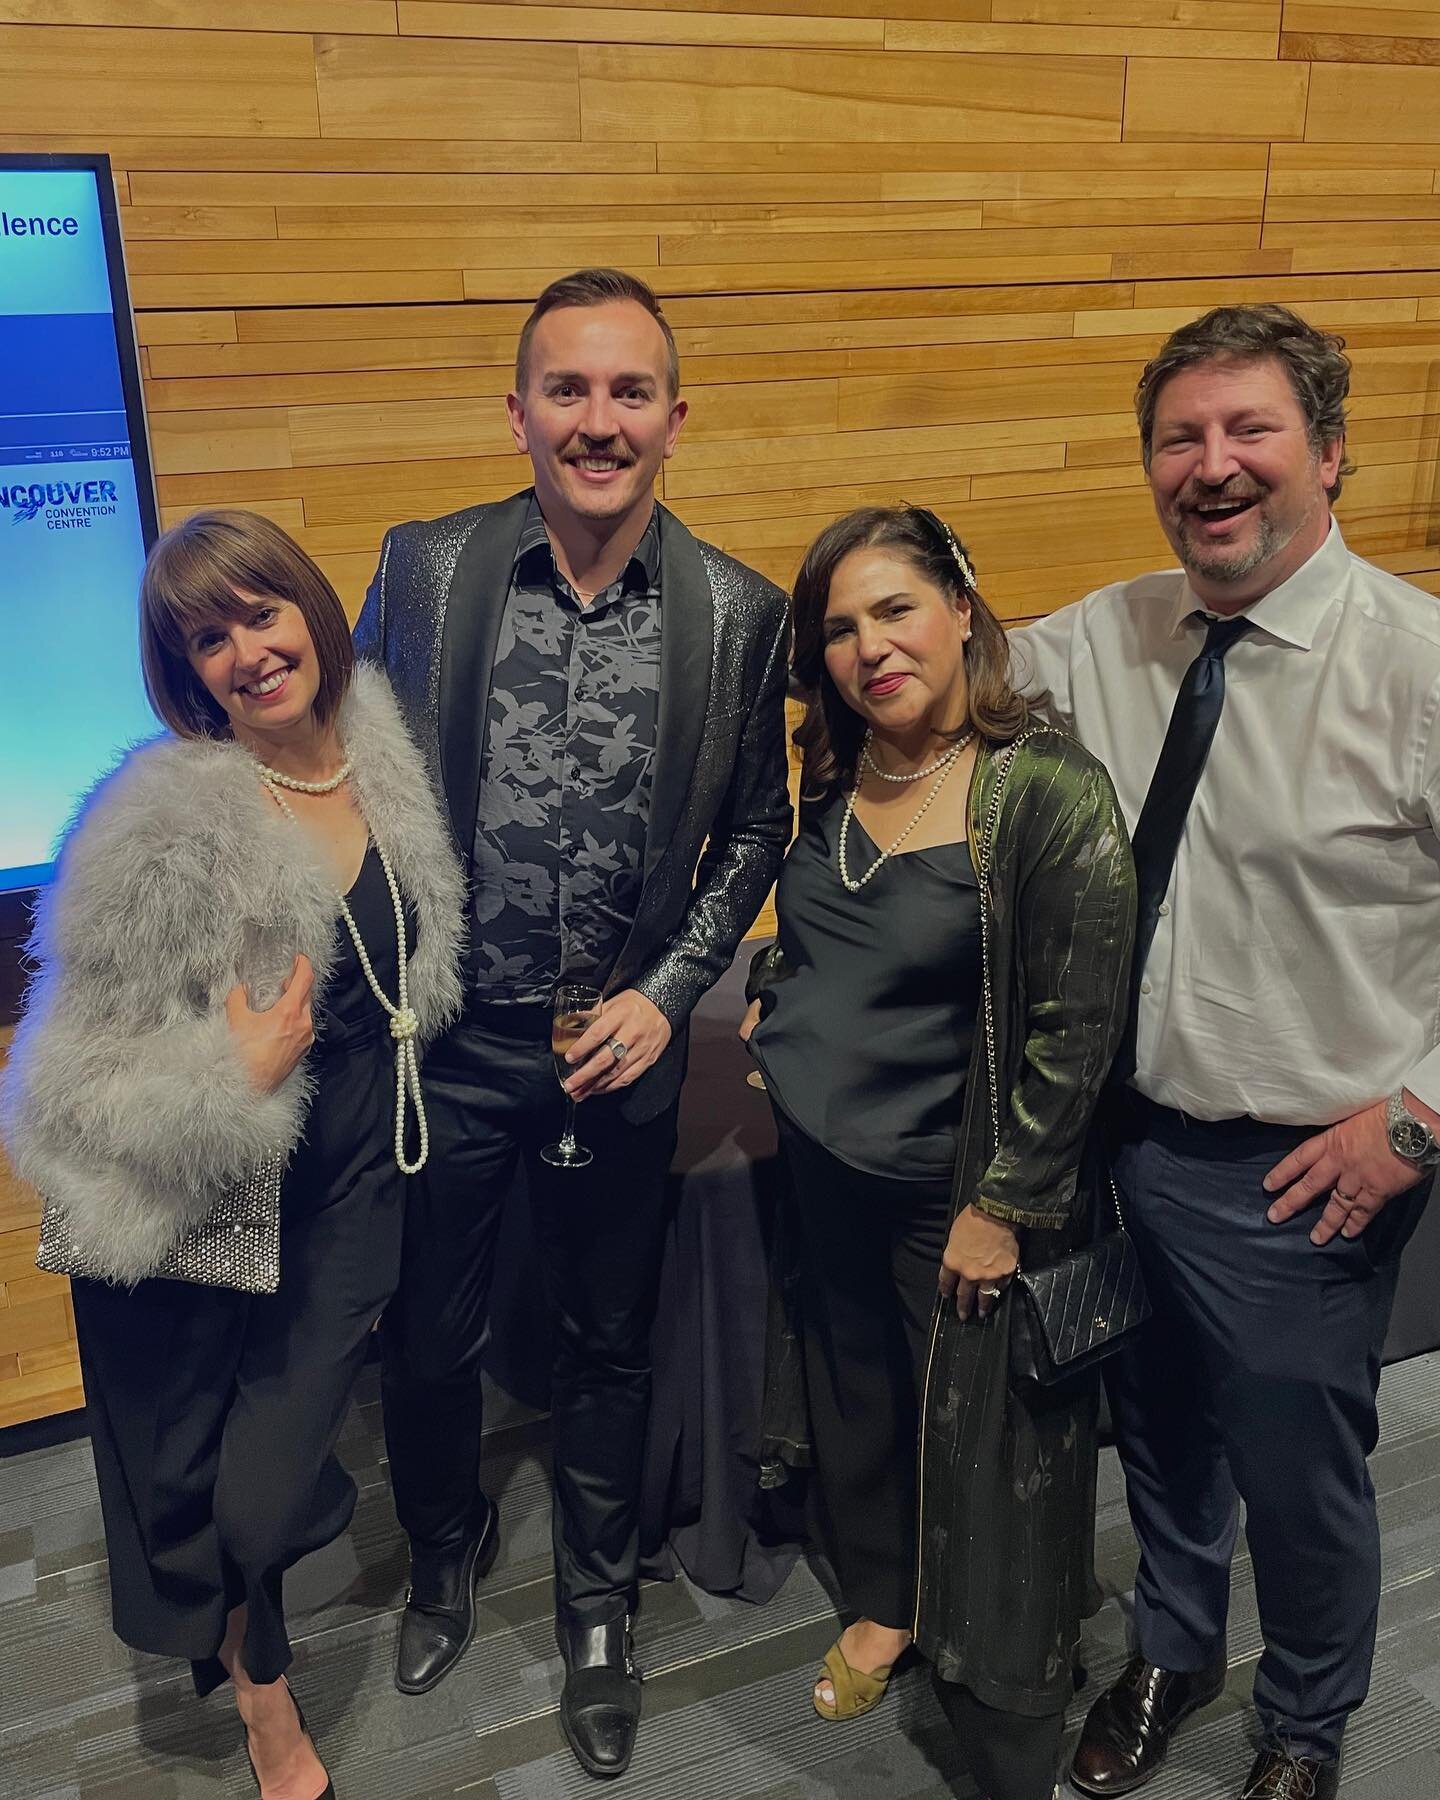 Thank you to @idibc for hosting us at the Shine Awards on Friday! It was a pleasure to sponsor the award show. This year showcased a number of highly talented interior designers who are revolutionizing the industry with their work.

The 20&rsquo;s th